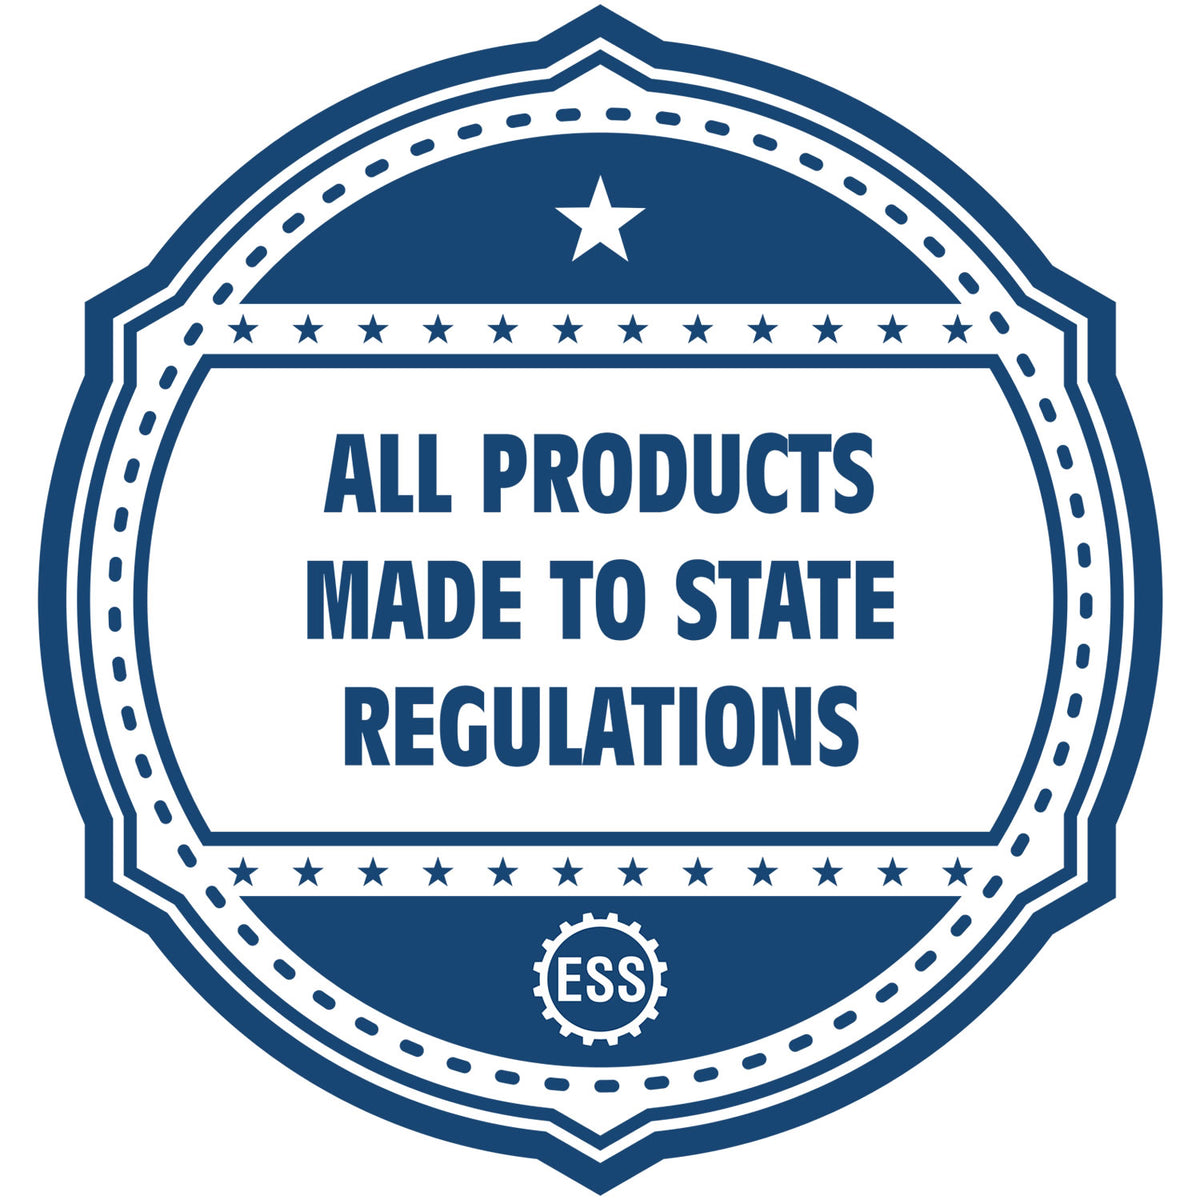 An icon or badge element for the Montana Landscape Architectural Seal Stamp showing that this product is made in compliance with state regulations.